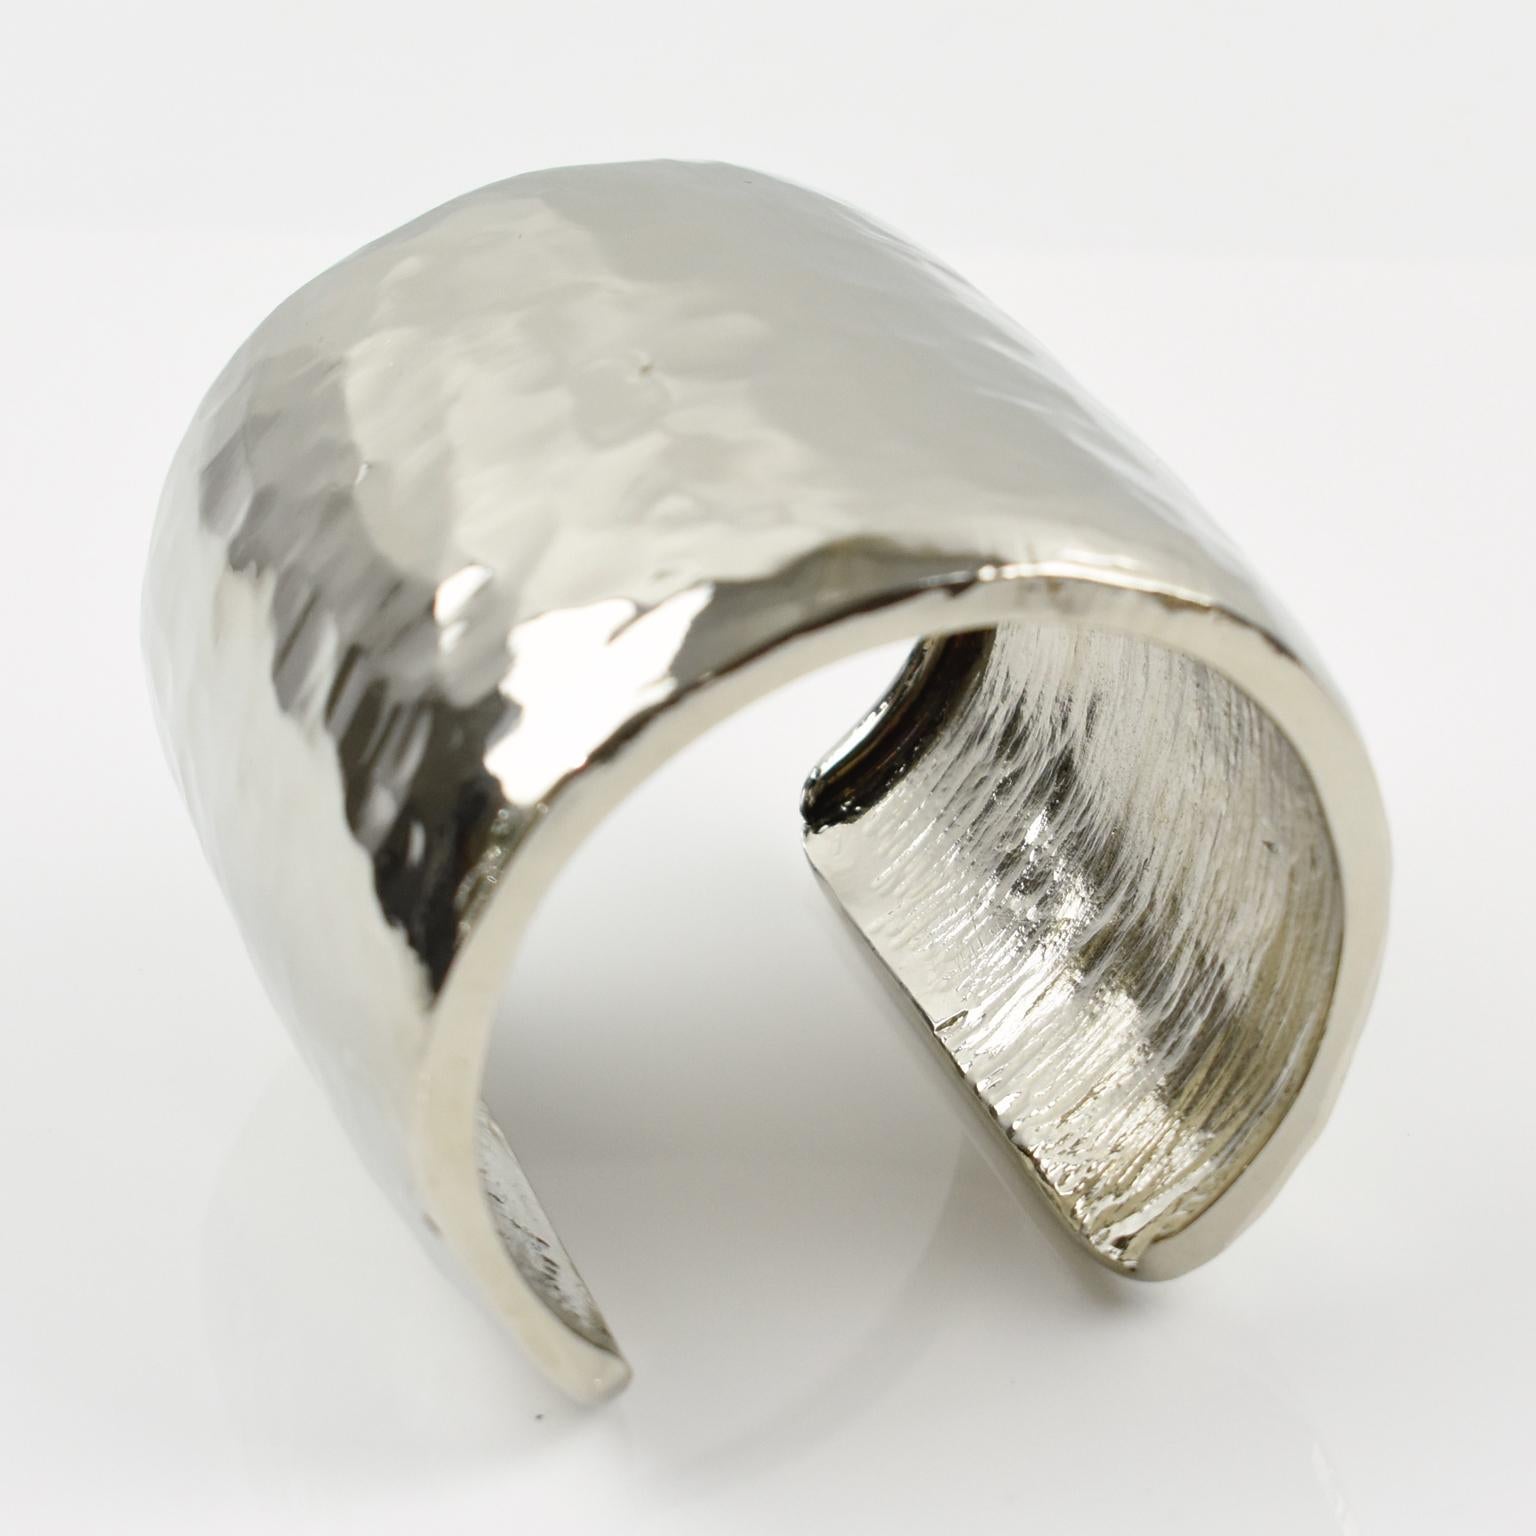 Stunning Guy Laroche Paris signed cuff bracelet. Brutalist oversized cuff design with hand-made feel, silvered metal extremely shiny with slightly hammered finish. Engraved signature underside: 'Guy Laroche - Paris'.
Measurements: inside across is